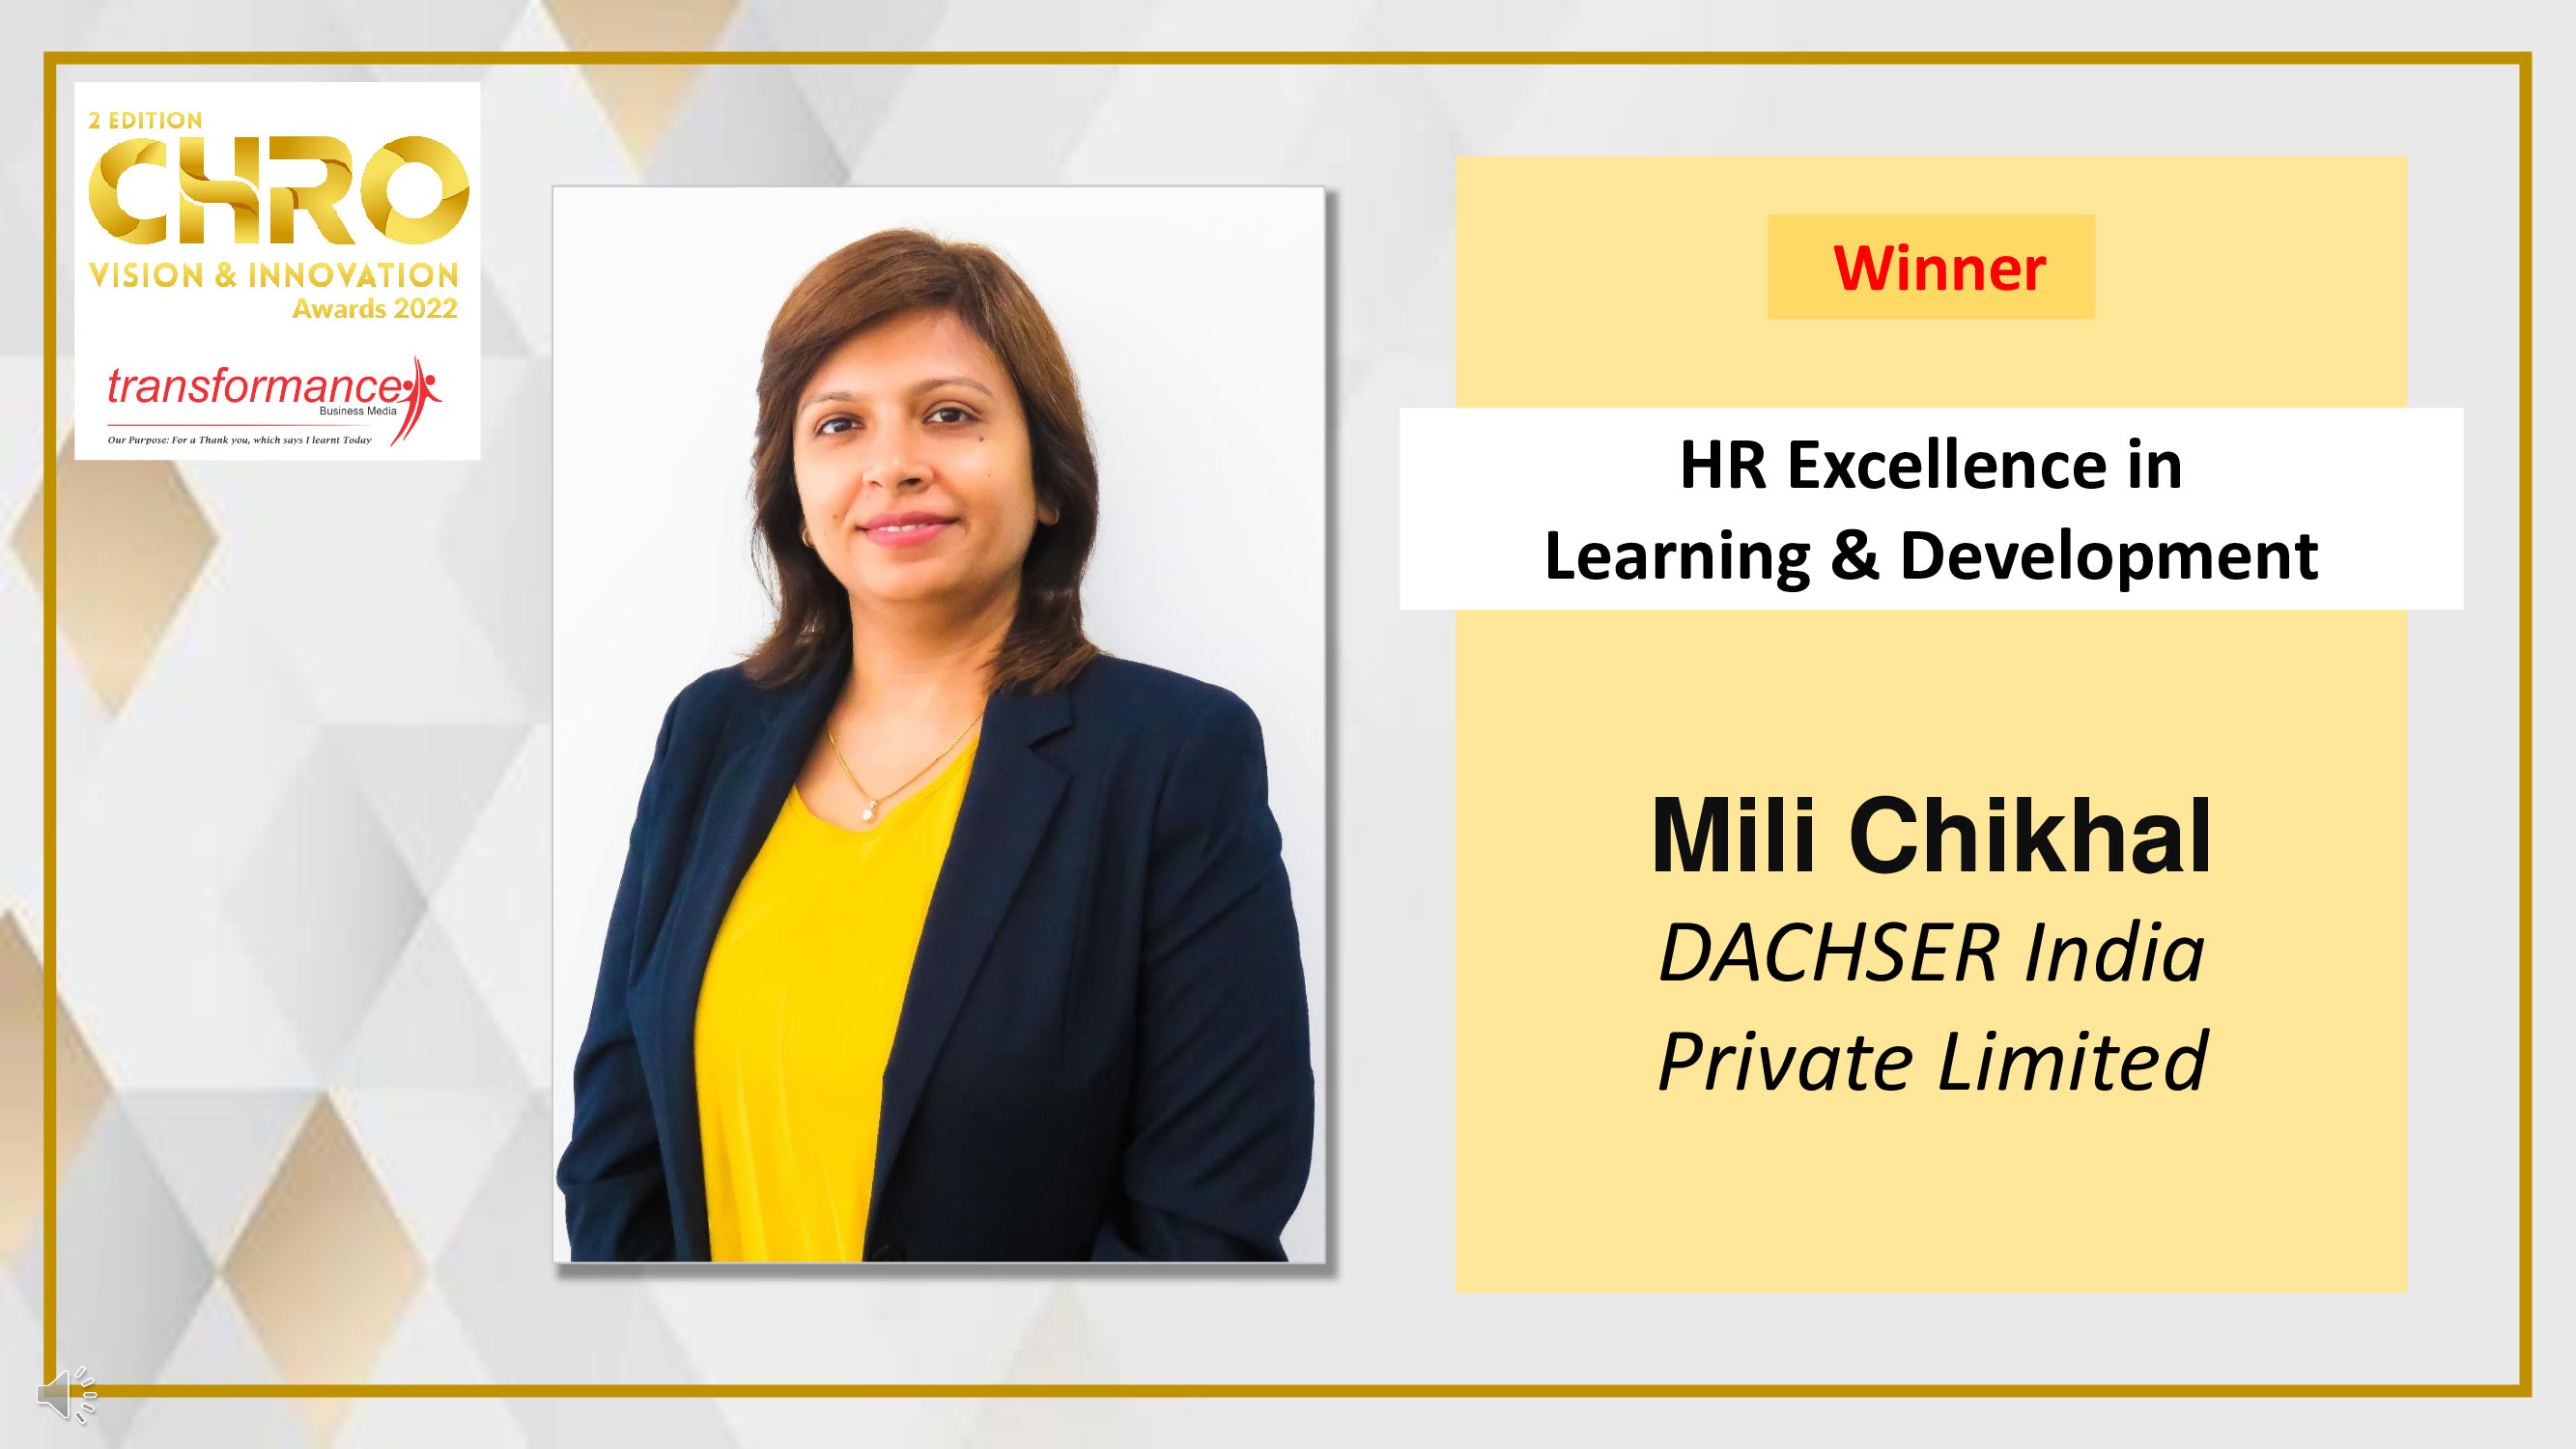 Mili Chikhal, DACHSER India Private Limited